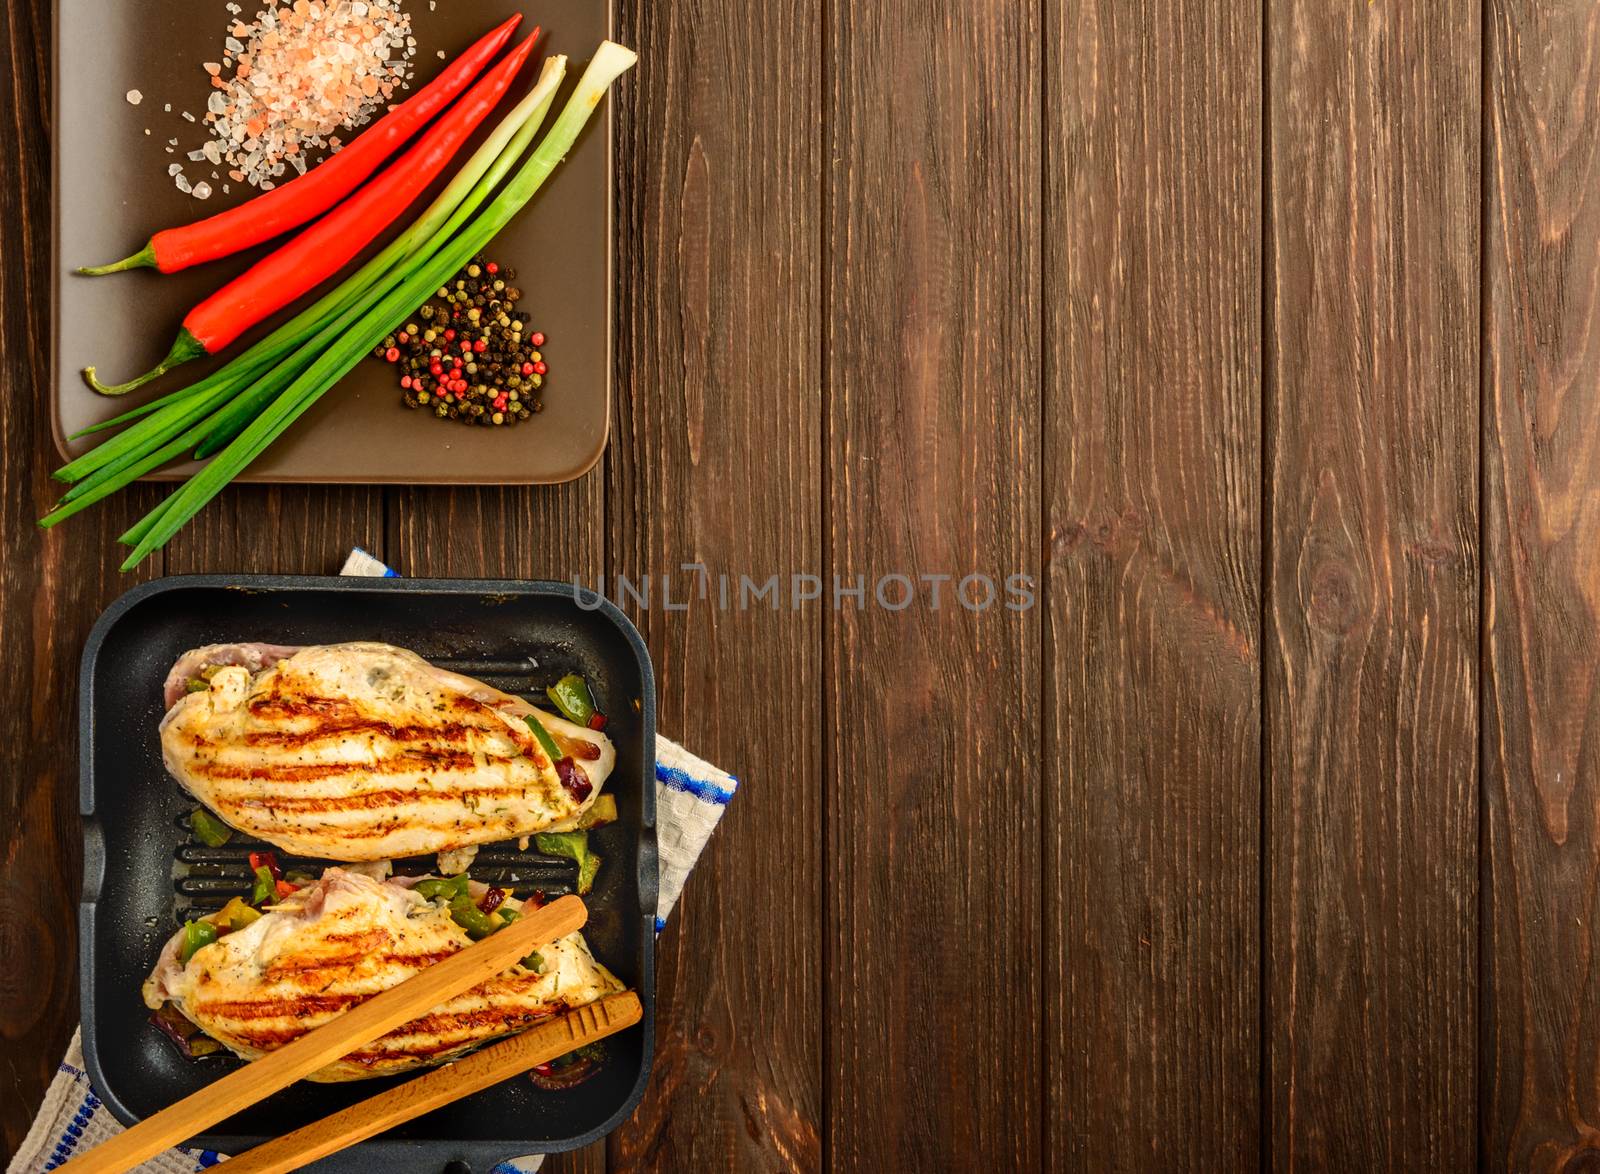 The juicy chicken fillet and vegetables made on a grill on a brown wooden background. Flat lay, copy space.